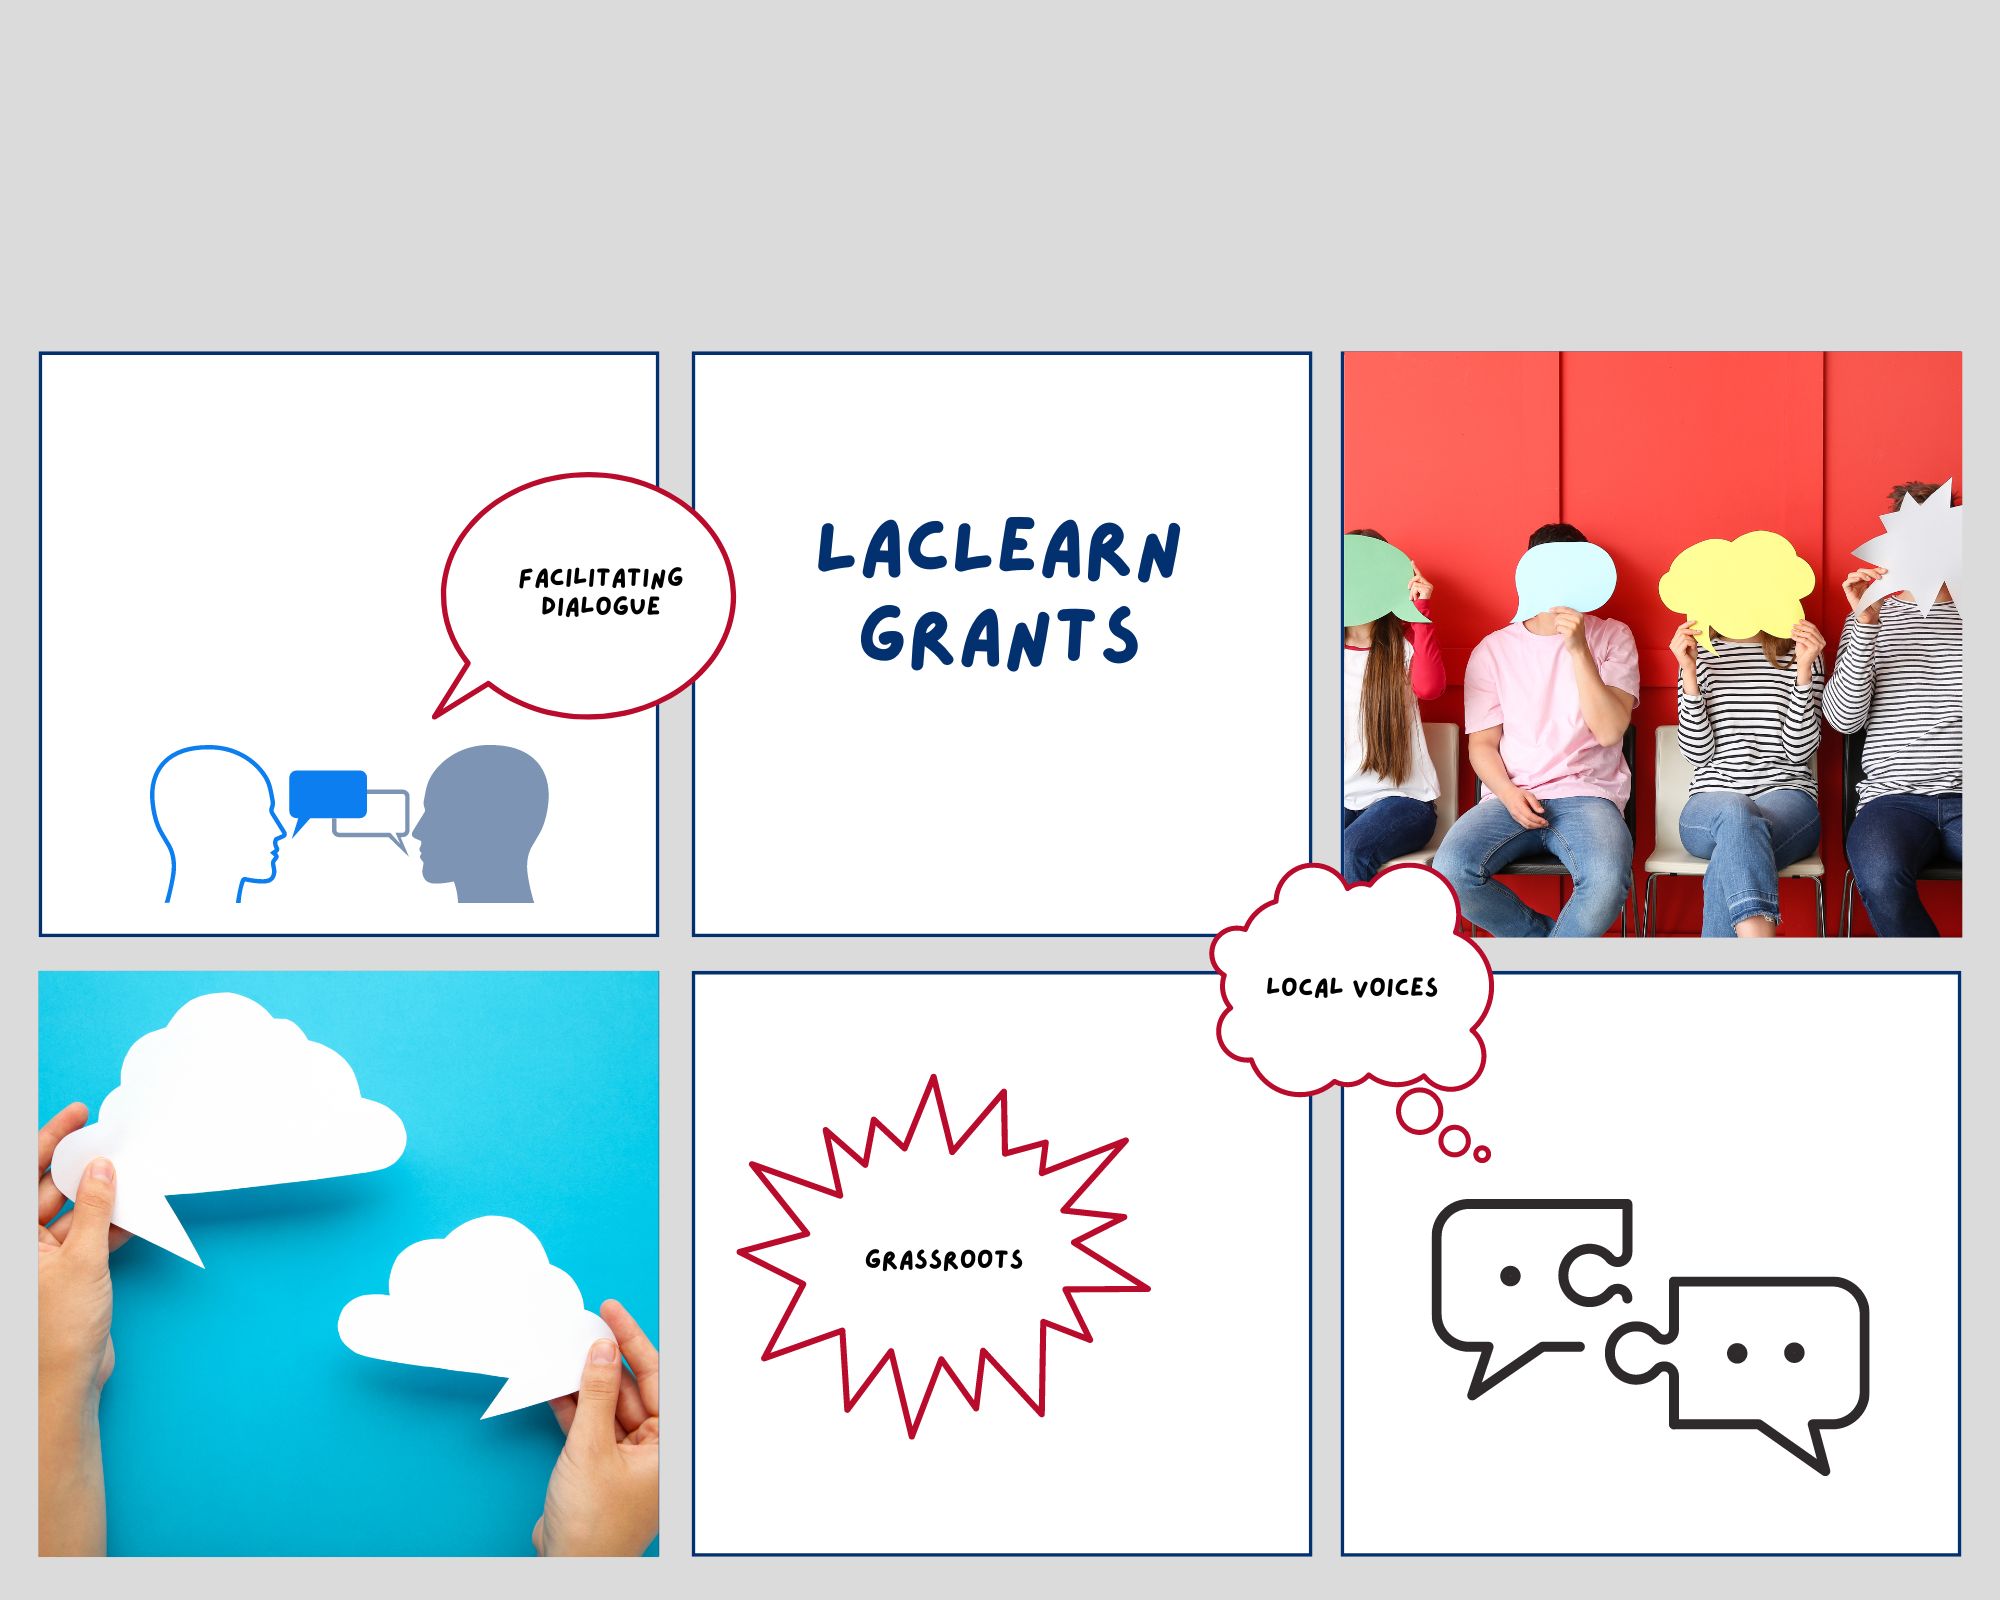 Call for grants republished under LACLEARN - Facilitating Dialogue Events